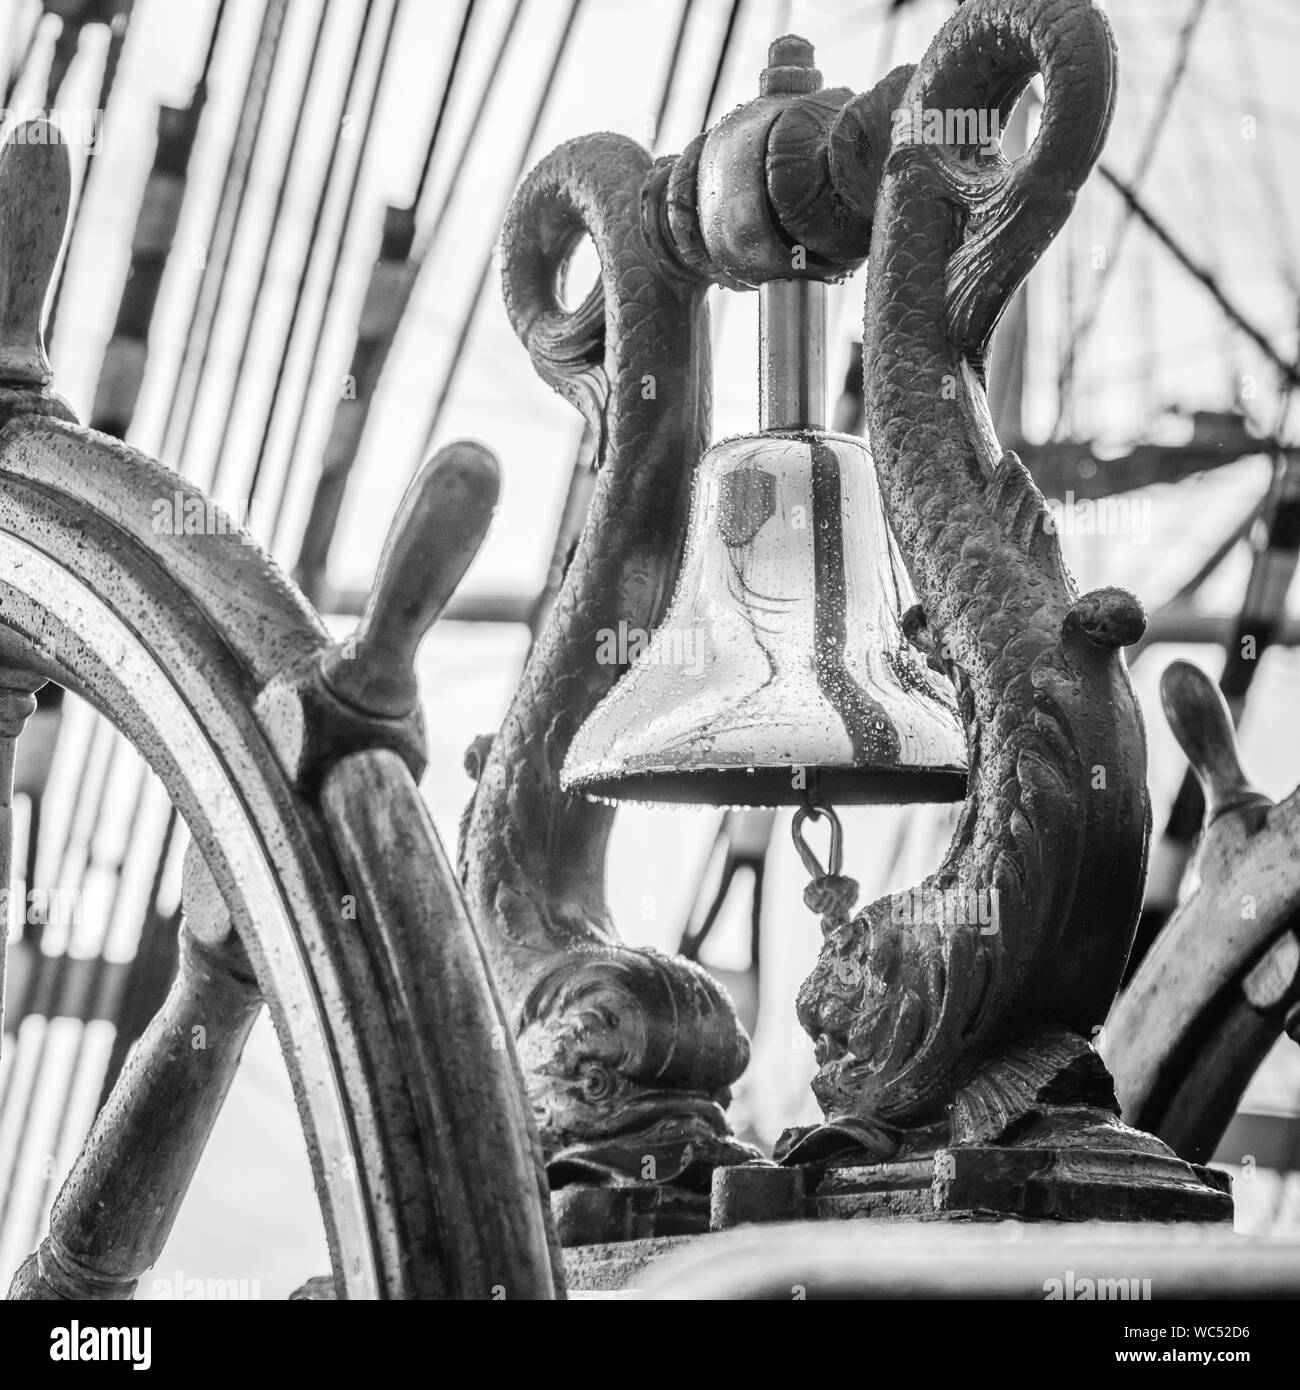 Ship's Bell and wheel the old sailboat, close-up Stock Photo